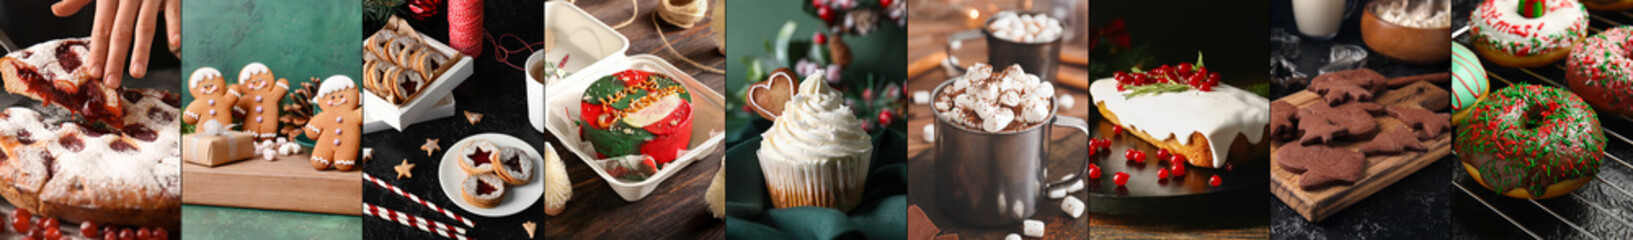 Group of traditional Christmas desserts on table, closeup